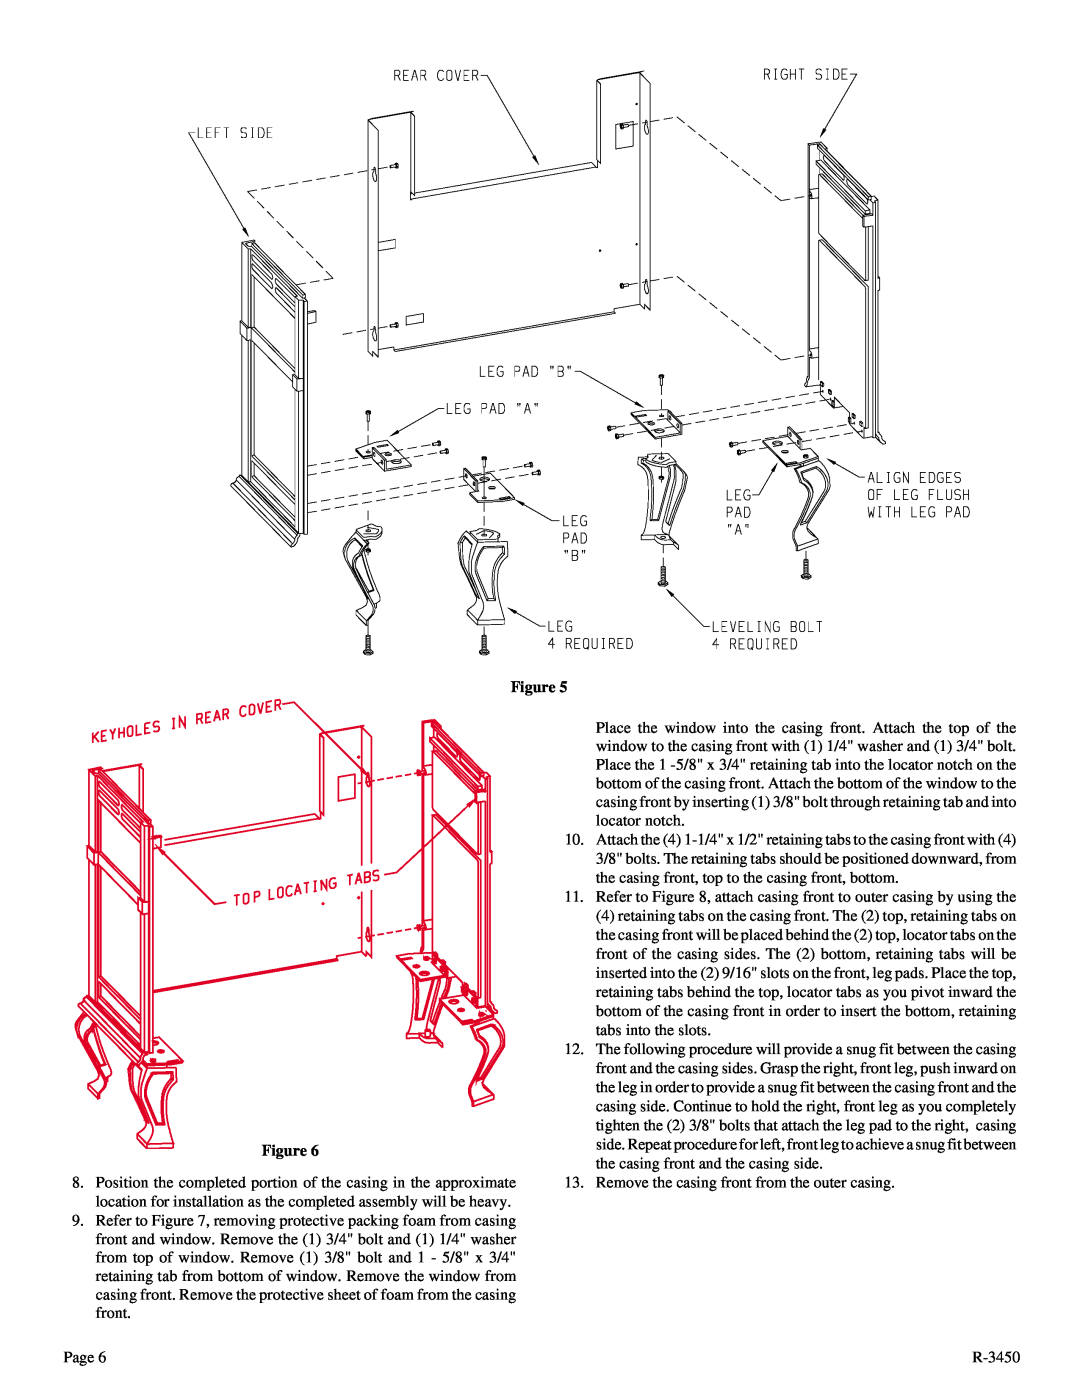 Empire Comfort Systems CIBV-30-2 installation instructions Remove the casing front from the outer casing 